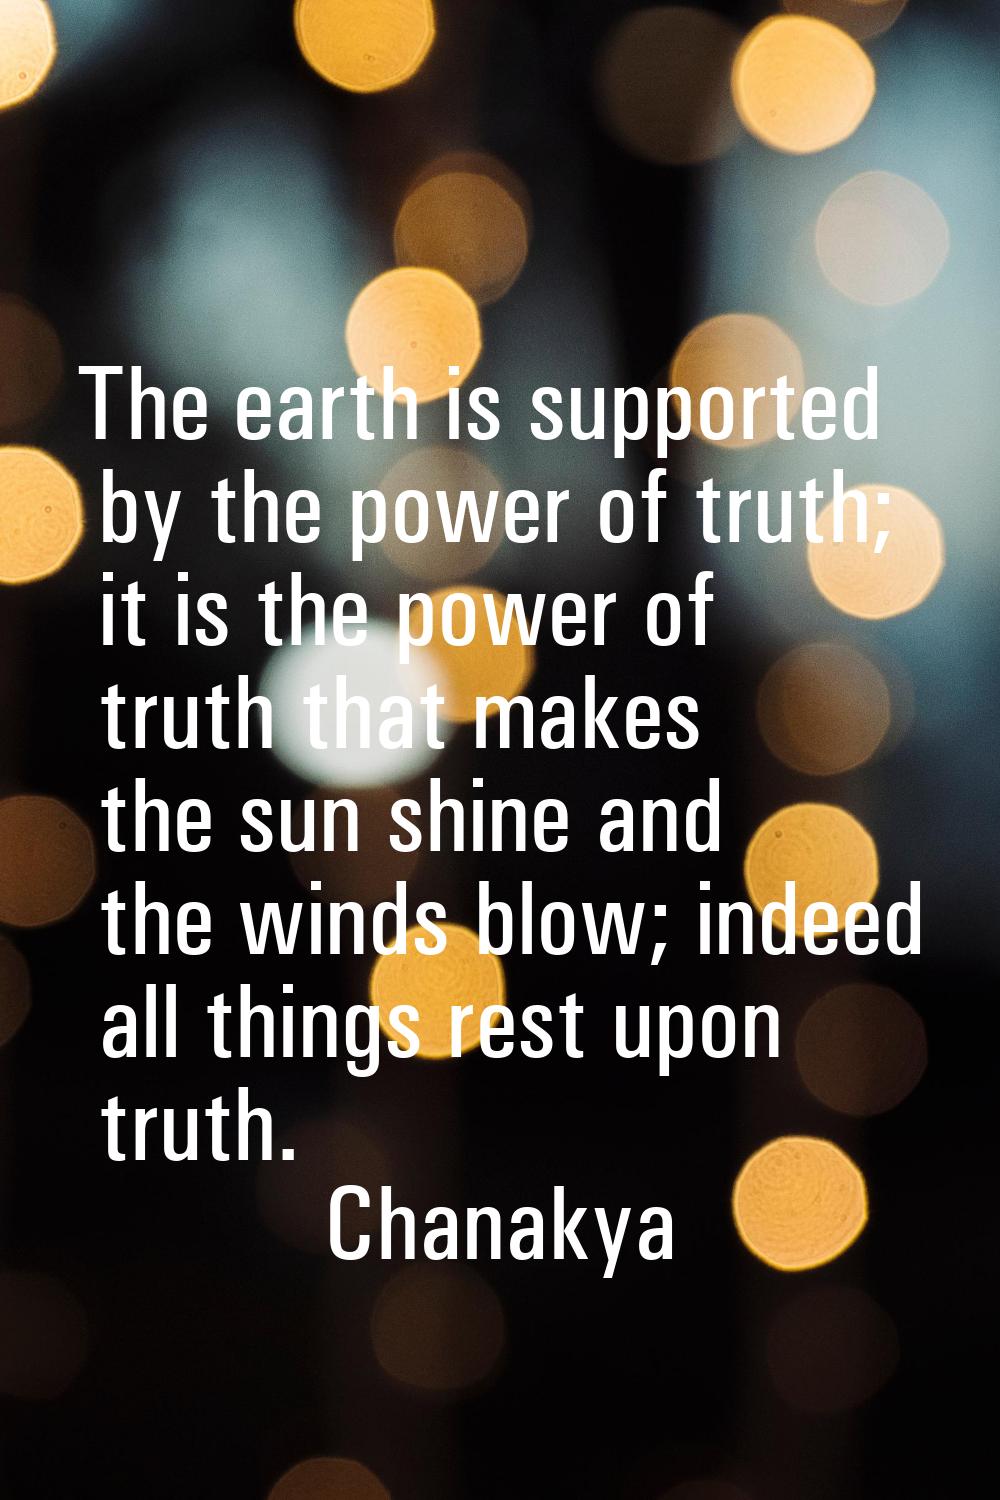 The earth is supported by the power of truth; it is the power of truth that makes the sun shine and